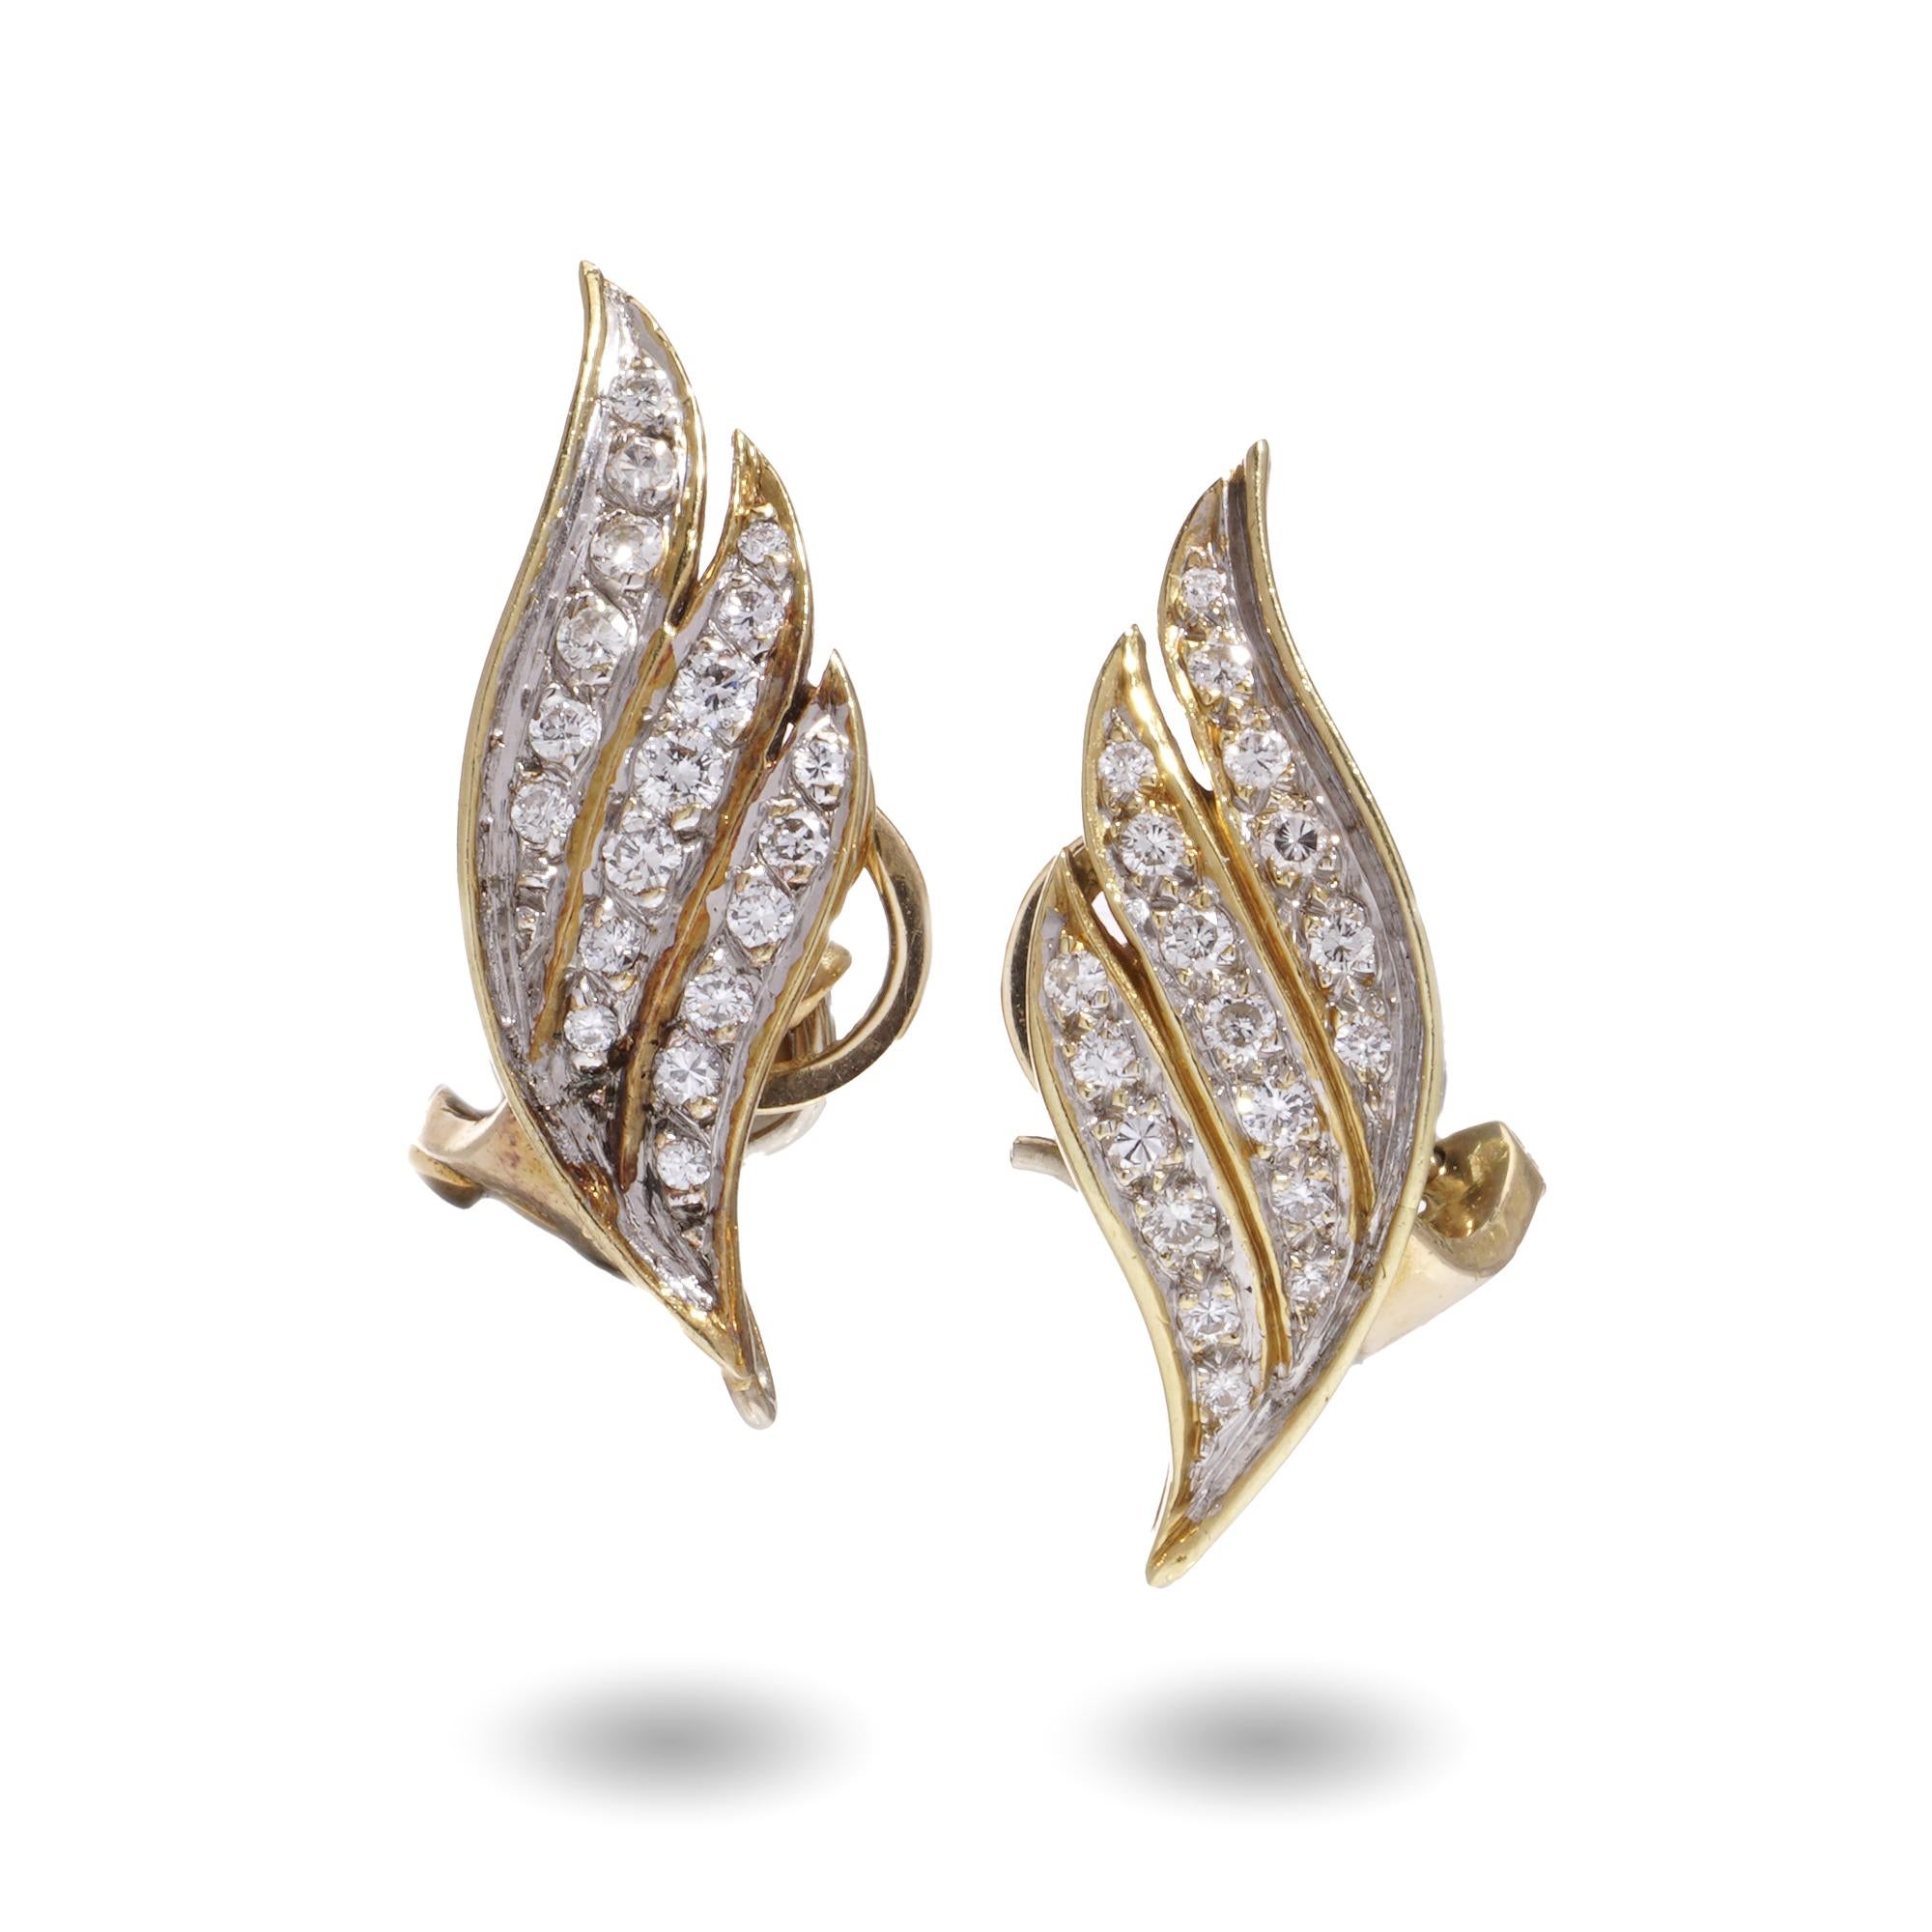 Vintage 18kt yellow gold pair of winged diamonds set day and night earrings with Cultured pearls. 
Made in 1980s 

Dimensions - 
Length: 4.2 x 1 cm 
Weight: 12 grams

Diamonds  - 
Cut: Round brilliant 
Quantity of stones: 72 
Approximate Carat